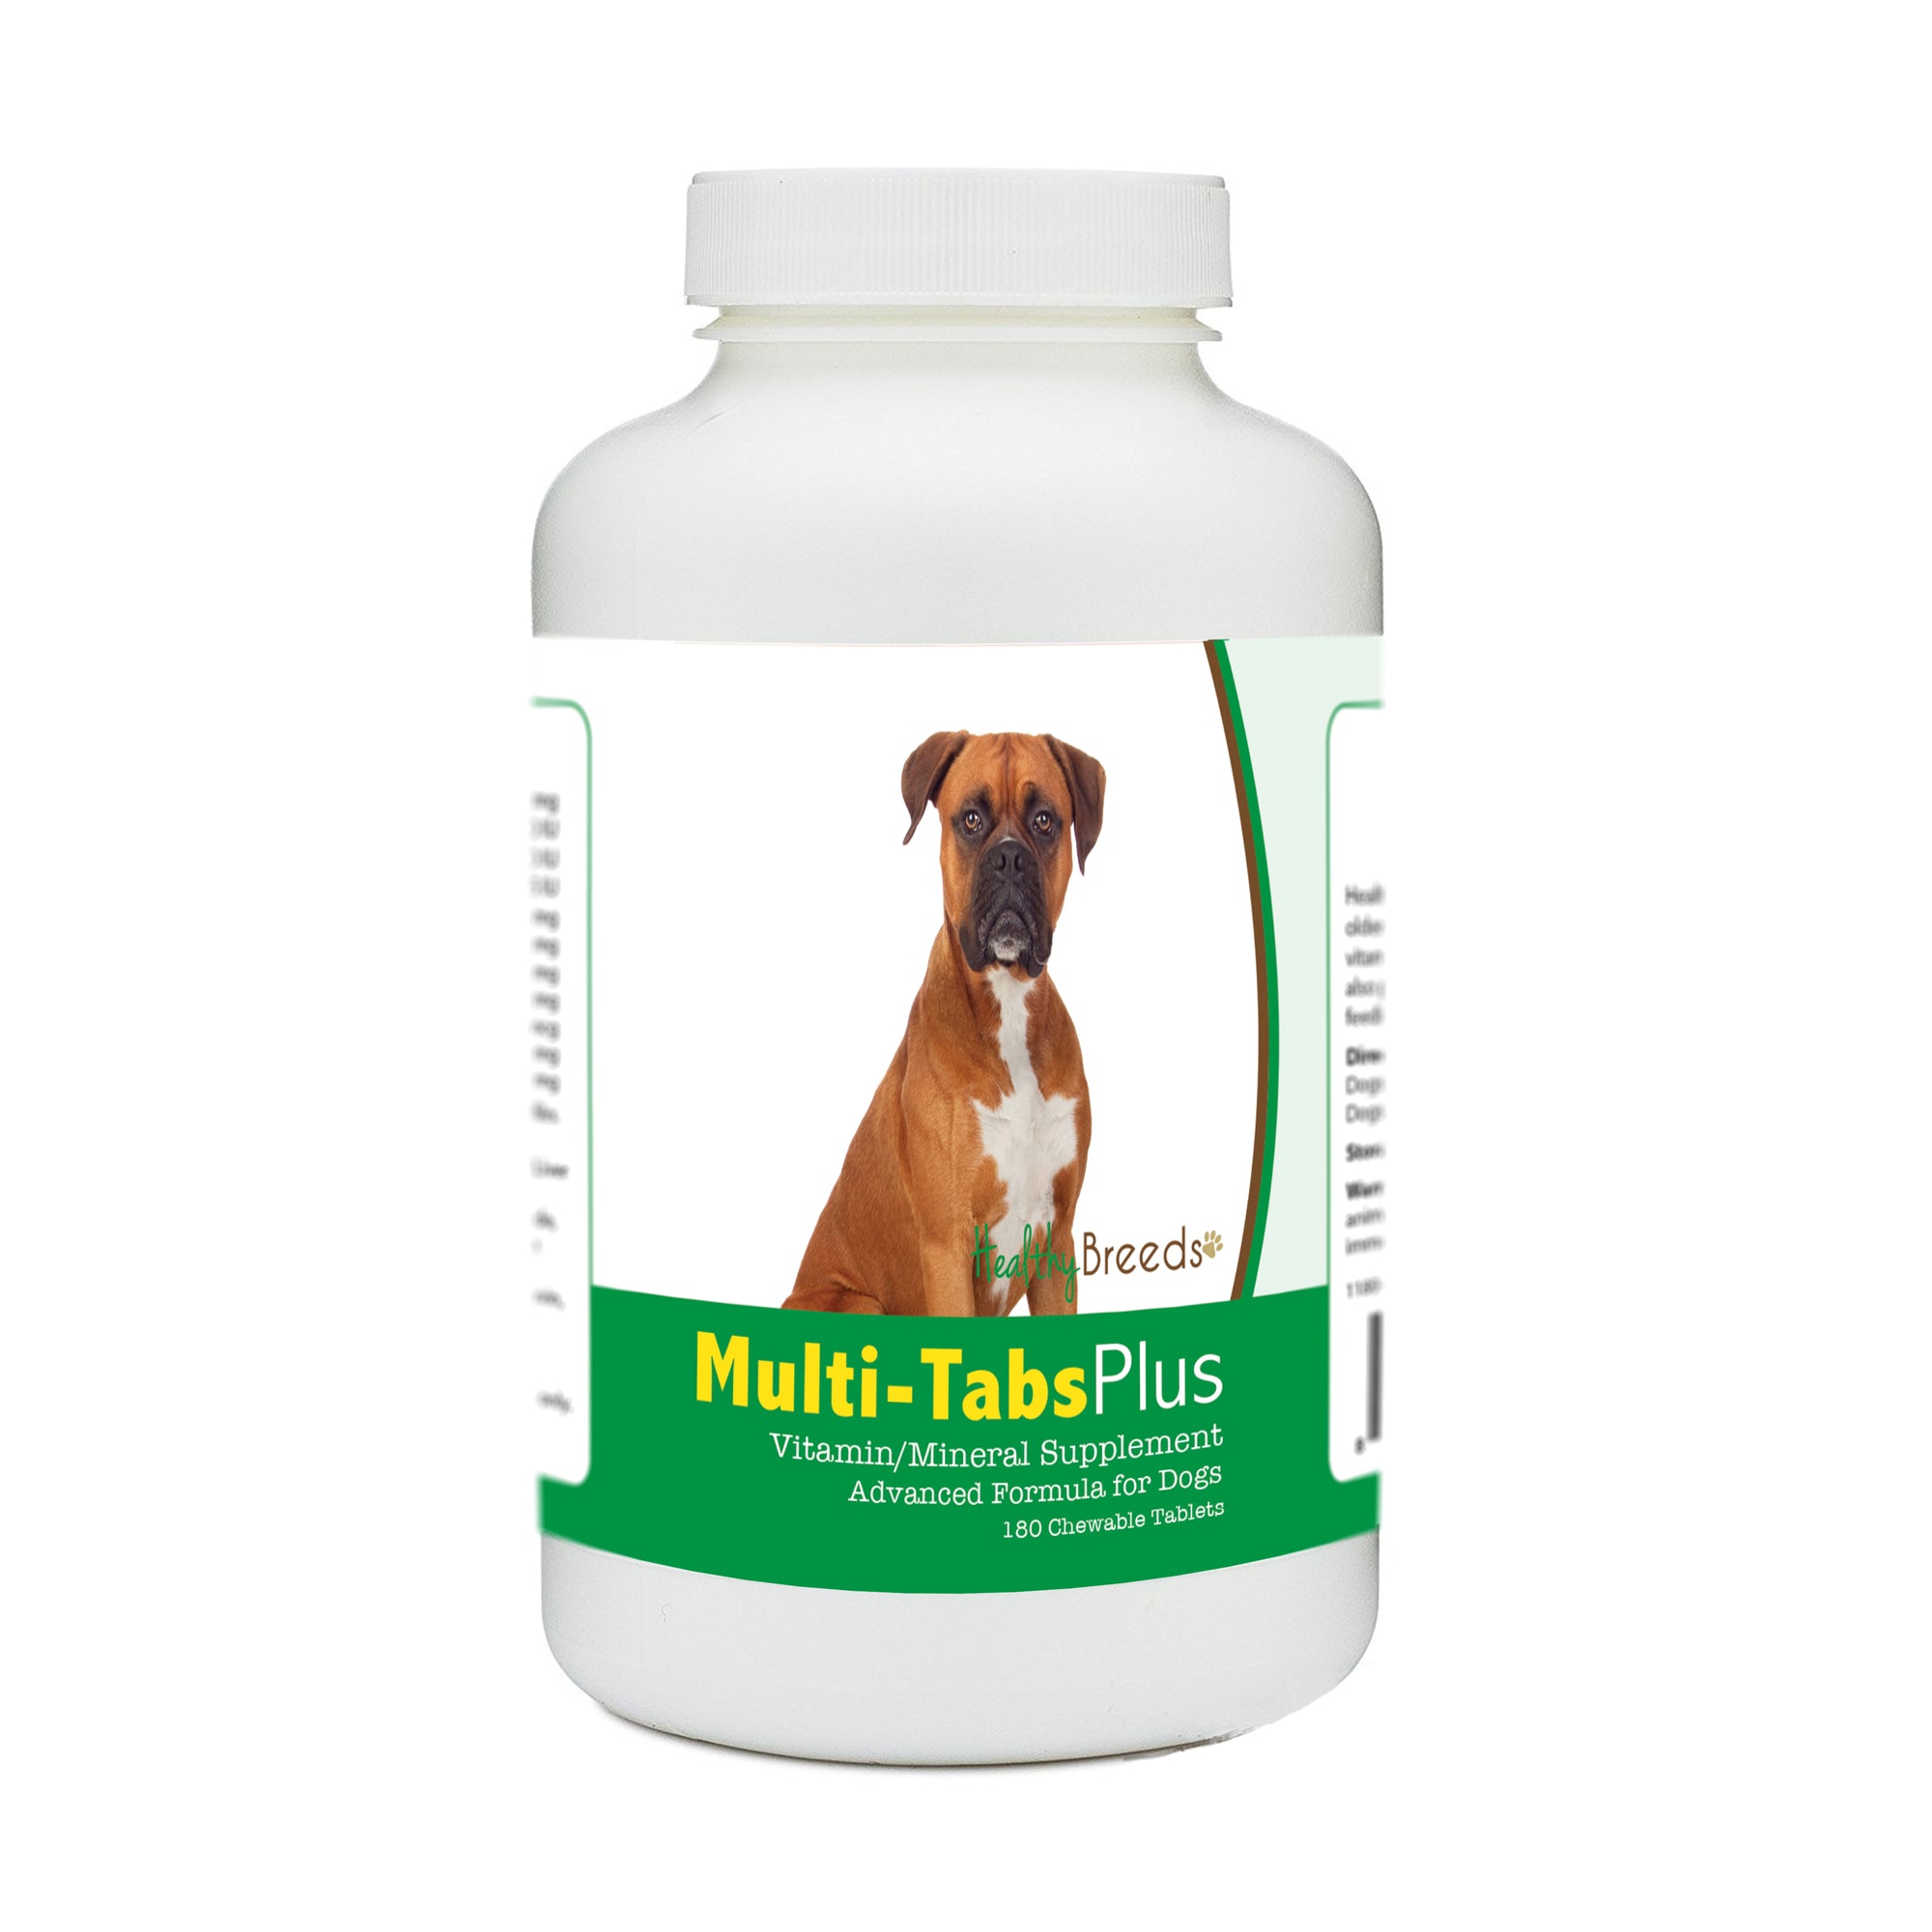 Healthy Breeds Boxer Multi-Tabs Plus Chewable Tablets 180 Count